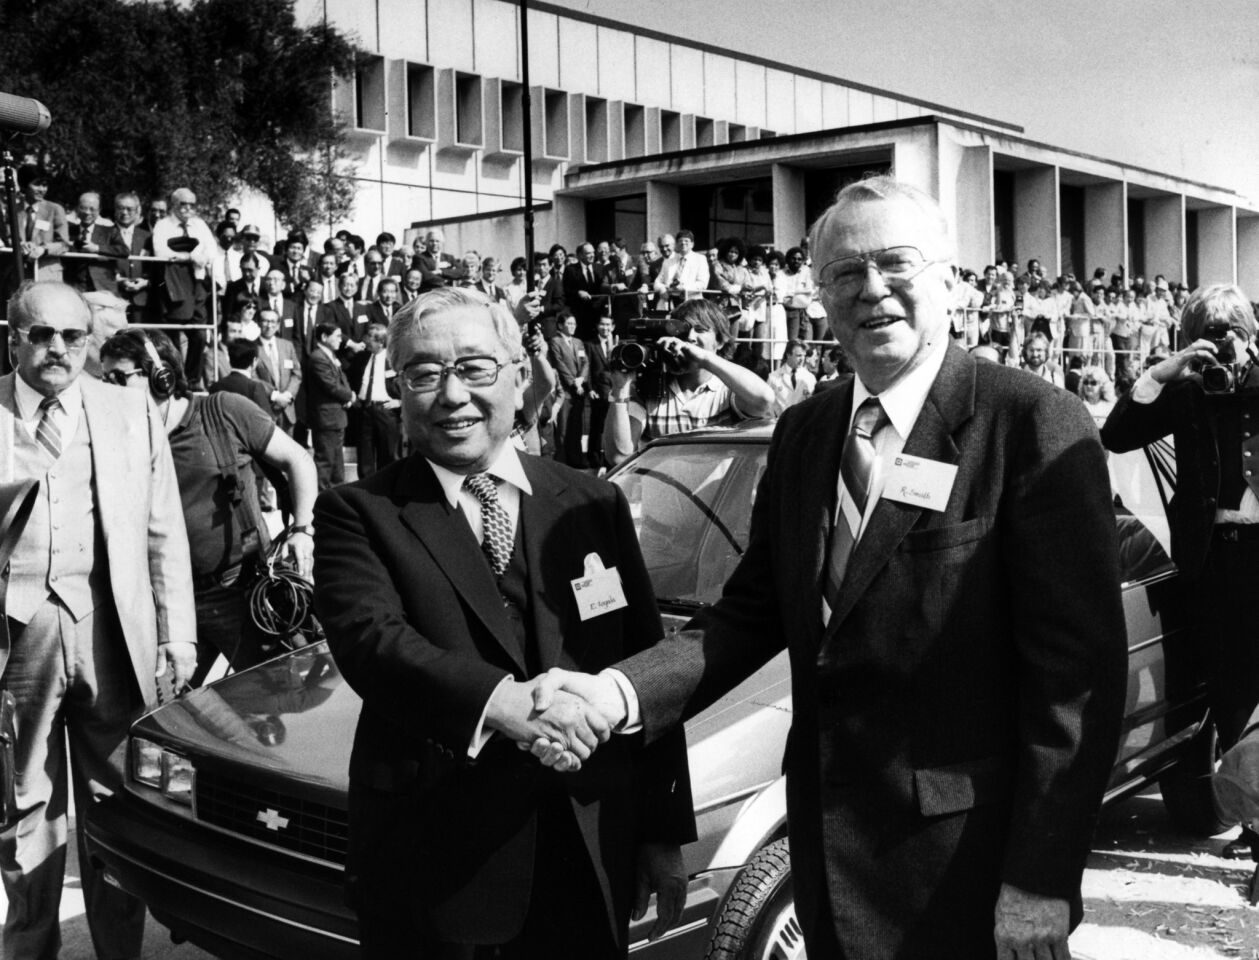 Credited with developing the Toyota car company's efficient, low-defect manufacturing processes, Toyoda, left, also helped spearhead Toyota's aggressive push into the U.S. auto market. He was 100. Full obituary Notable deaths of 2012